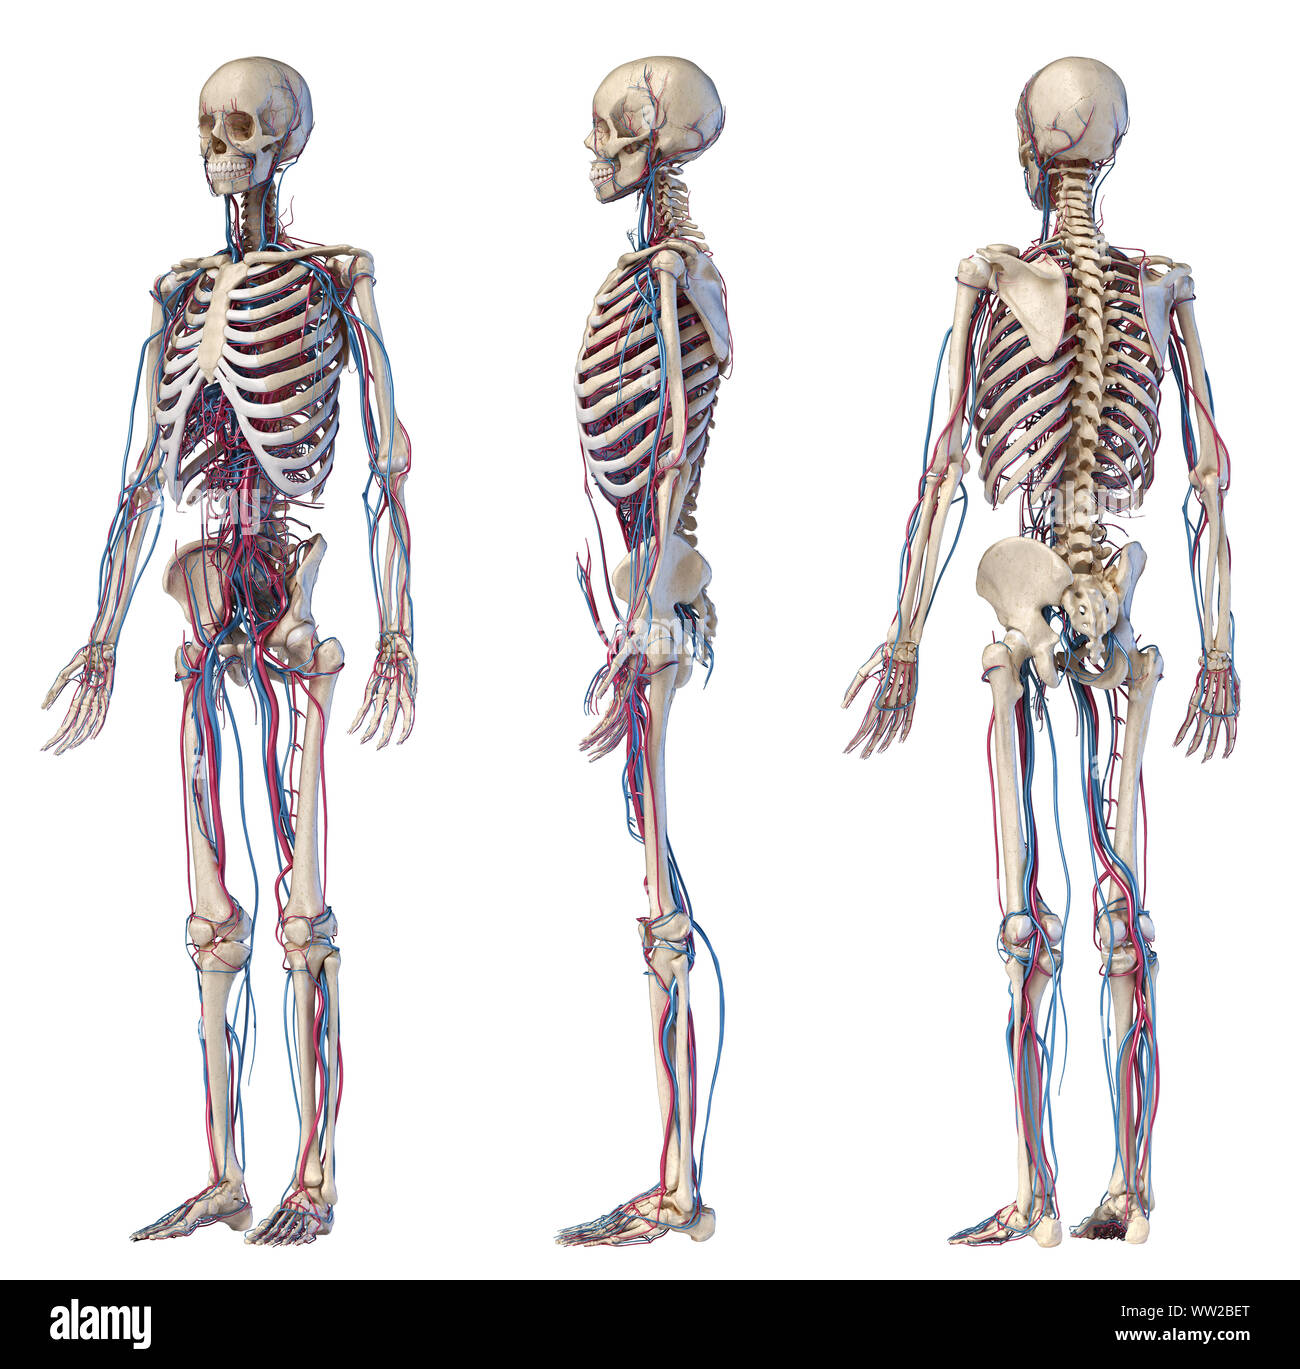 Human body anatomy. 3d illustration of Skeletal and cardiovascular systems. Three views. On white background. Stock Photo